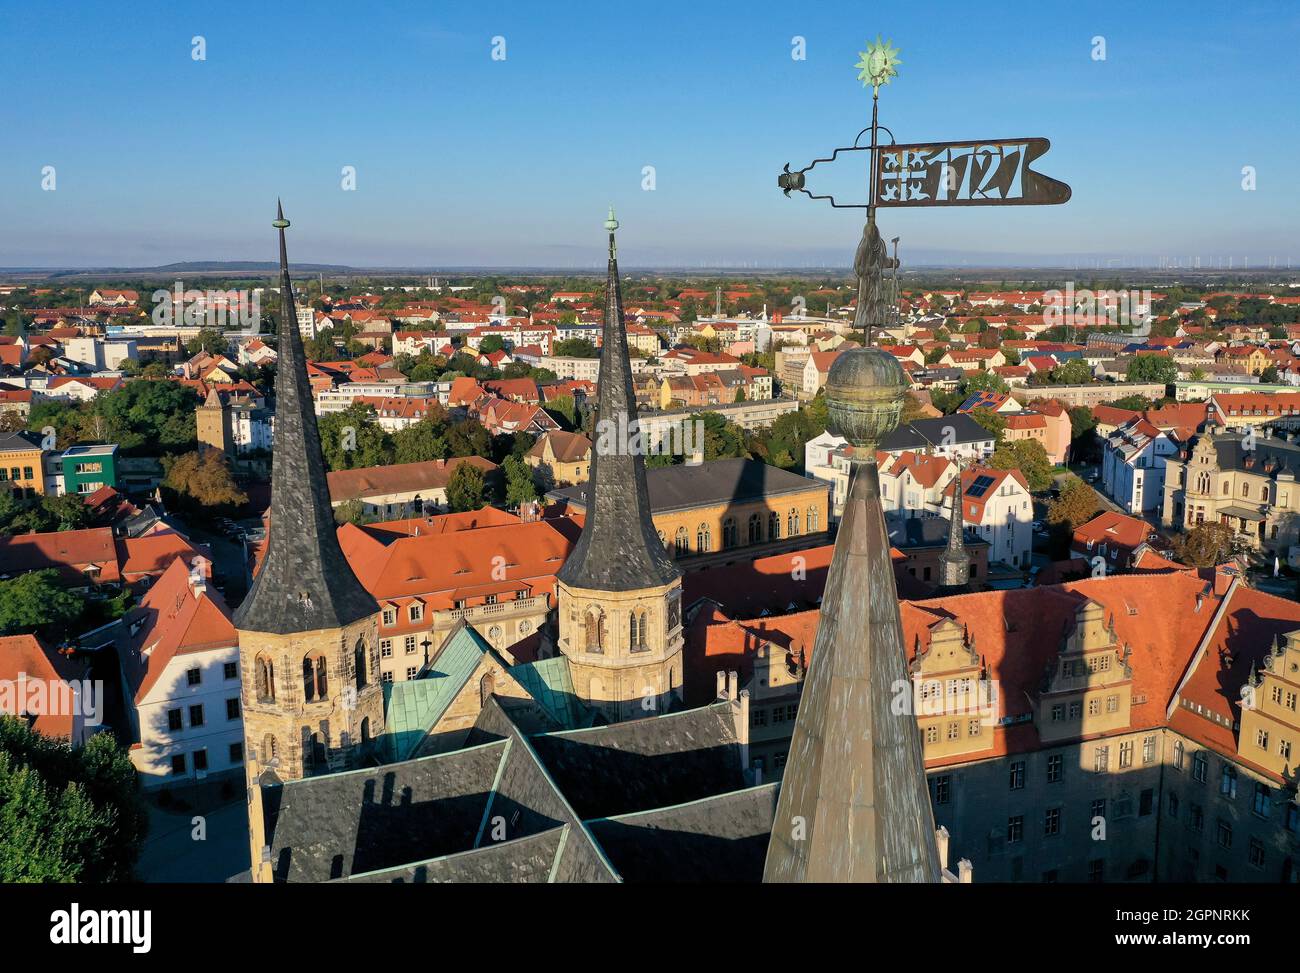 30 September 2021, Saxony-Anhalt, Merseburg: A weather vane with the year 1727 rotates on a tower at Merseburg Cathedral. A three-day festival in Merseburg from 1 to 3 October commemorates the consecration of the cathedral 1000 years ago. One of the highlights of the program under the motto 'Consecrated for Eternity' is a procession during which the cathedral will ceremoniously receive a new bell. According to tradition, Merseburg Cathedral was consecrated on October 1, 1021 in the presence of Emperor Heinrich II and his wife Kunigunde. (Aerial view with drone) Photo: Jan Woitas/dpa-Zentralbil Stock Photo